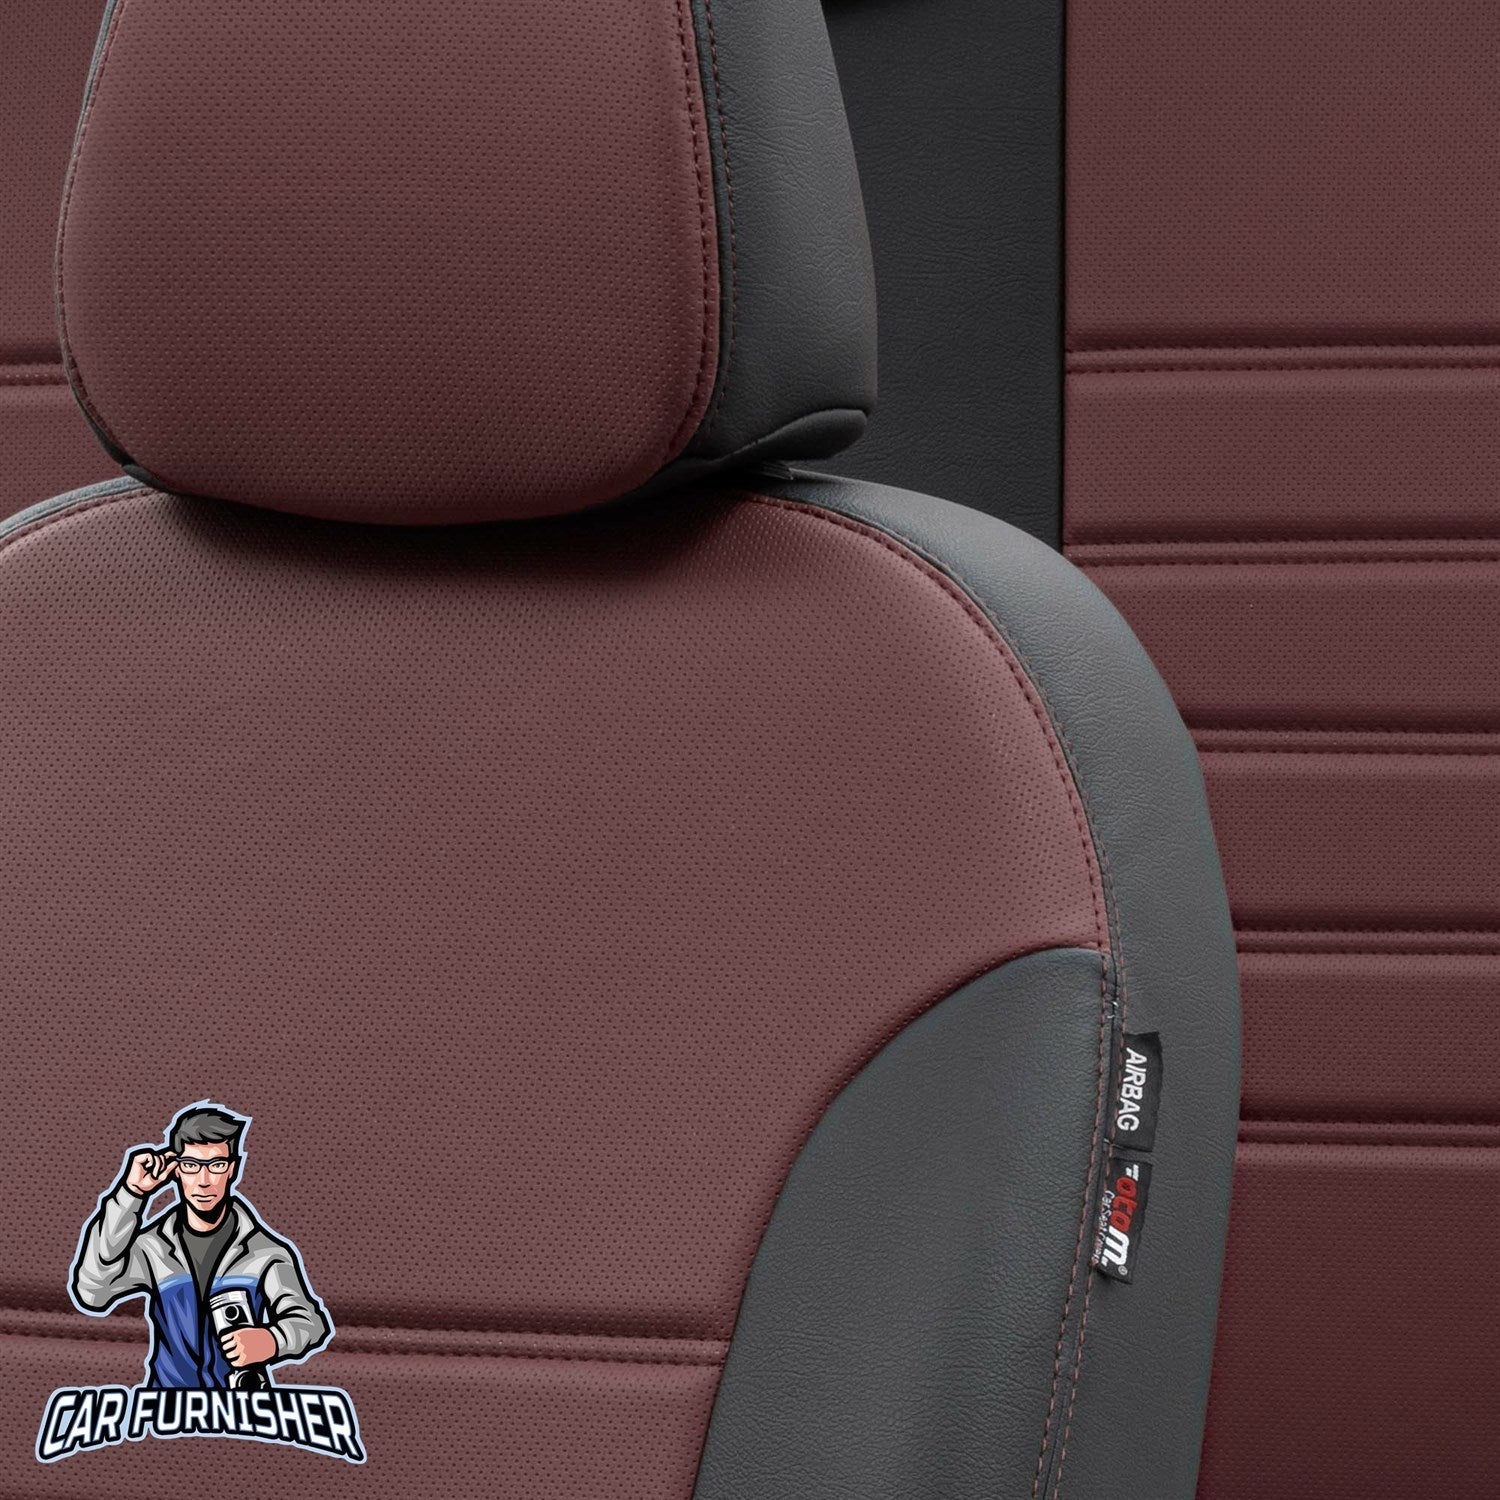 Geely Emgrand Seat Covers Istanbul Leather Design Burgundy Leather